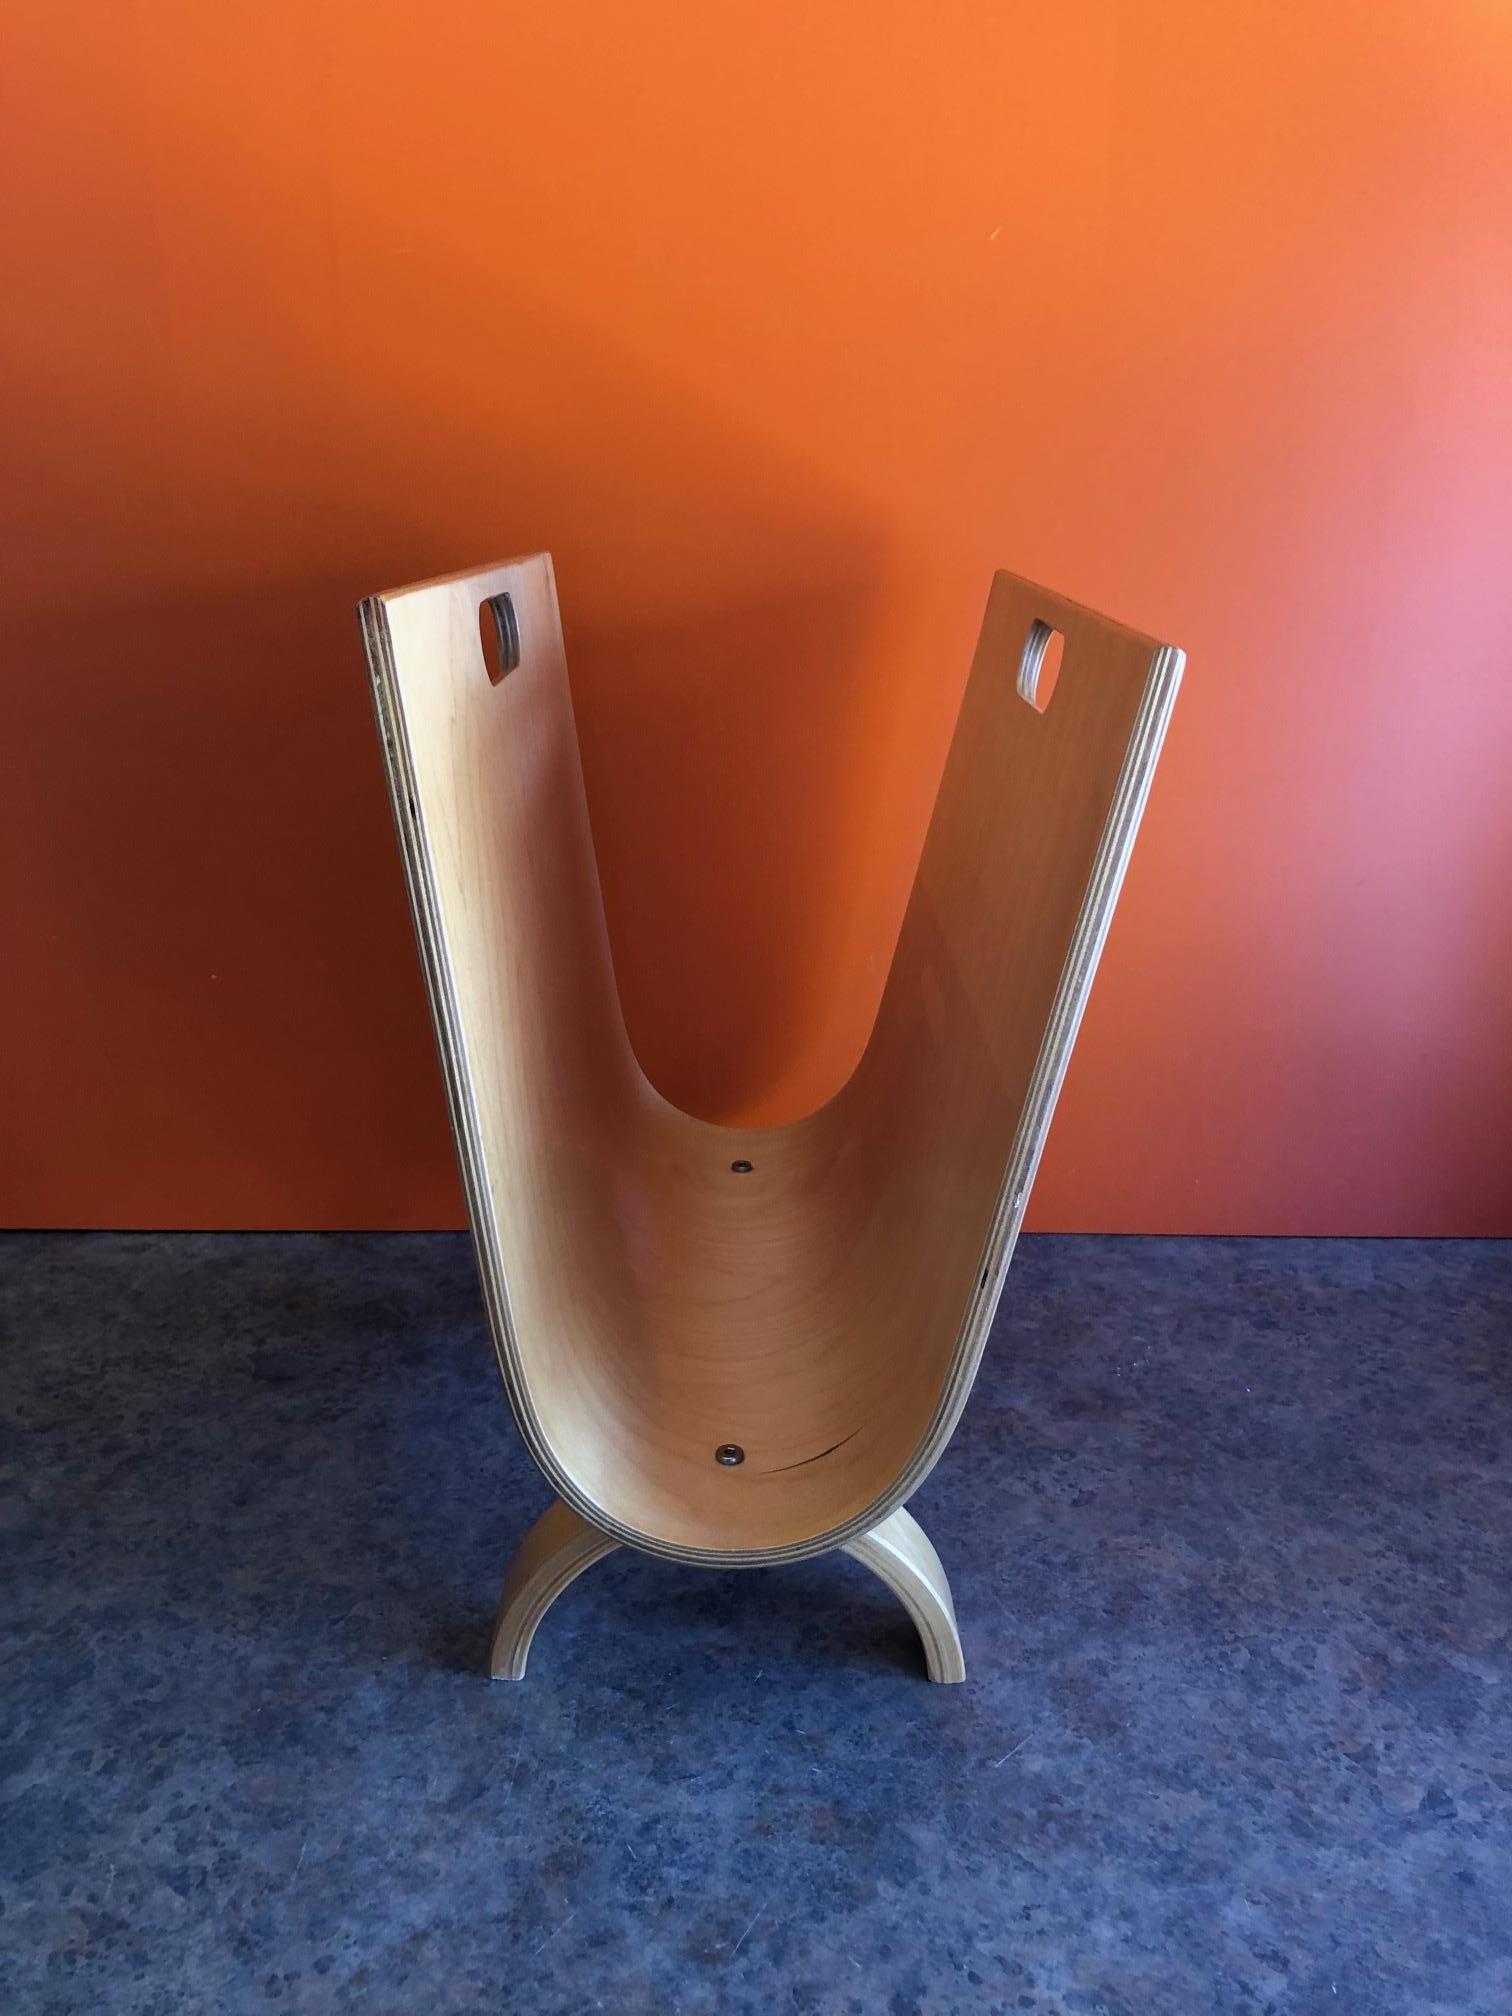 American Mid-Century Modern Bent Plywood Magazine Holder with Handles after Alvar Aalto